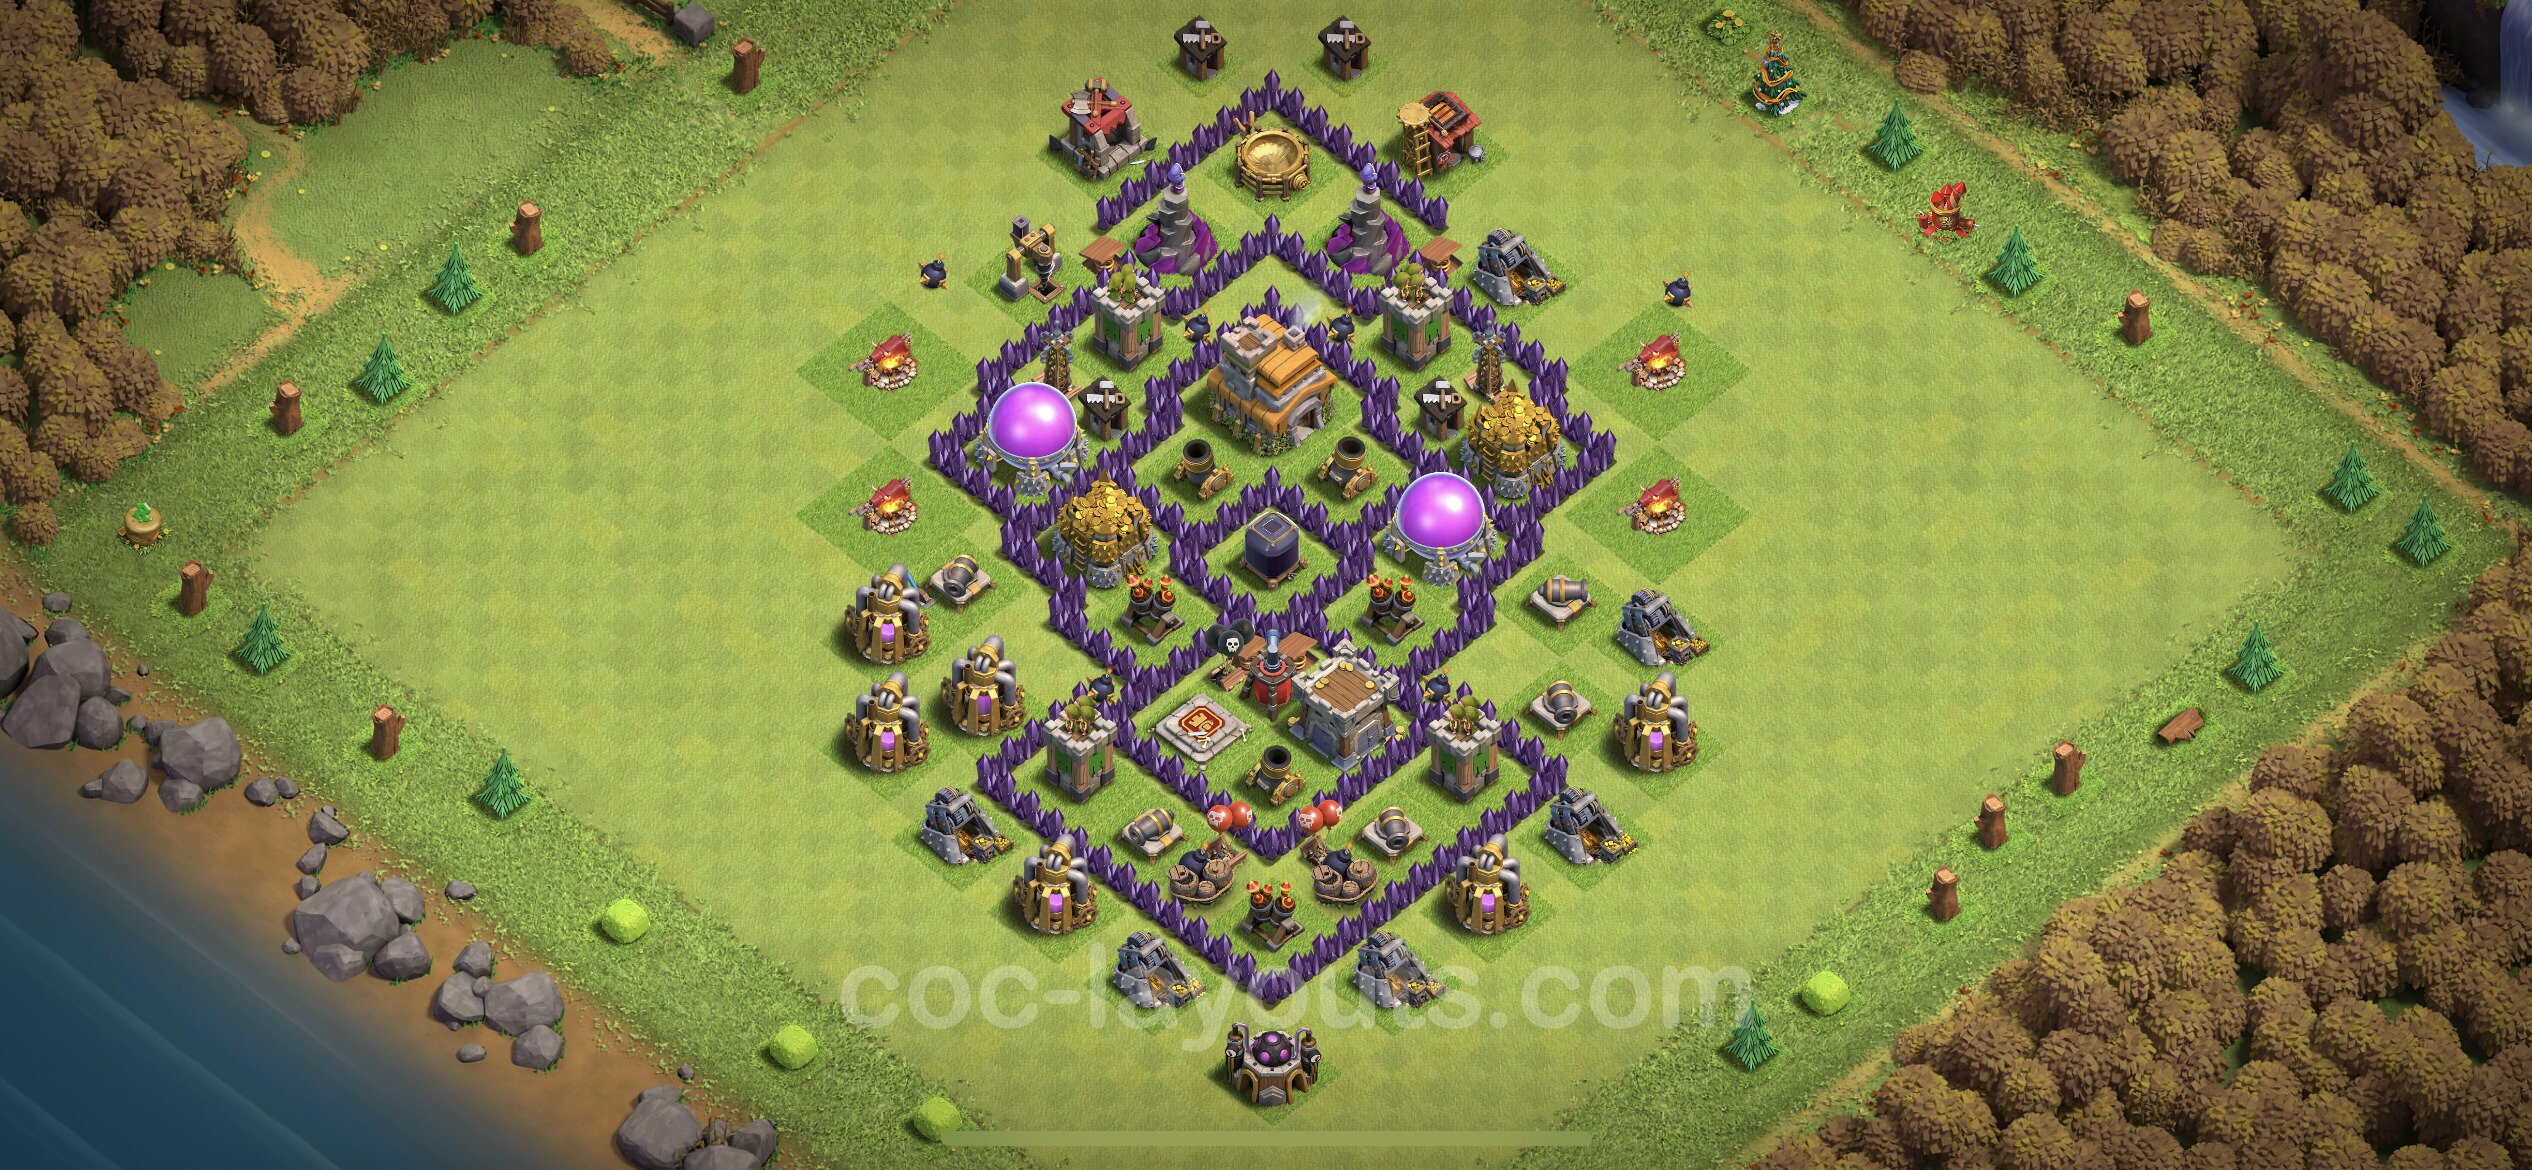 Farming Base TH7 Max Levels with Link, Hybrid, Anti Everything - Town Hall ...